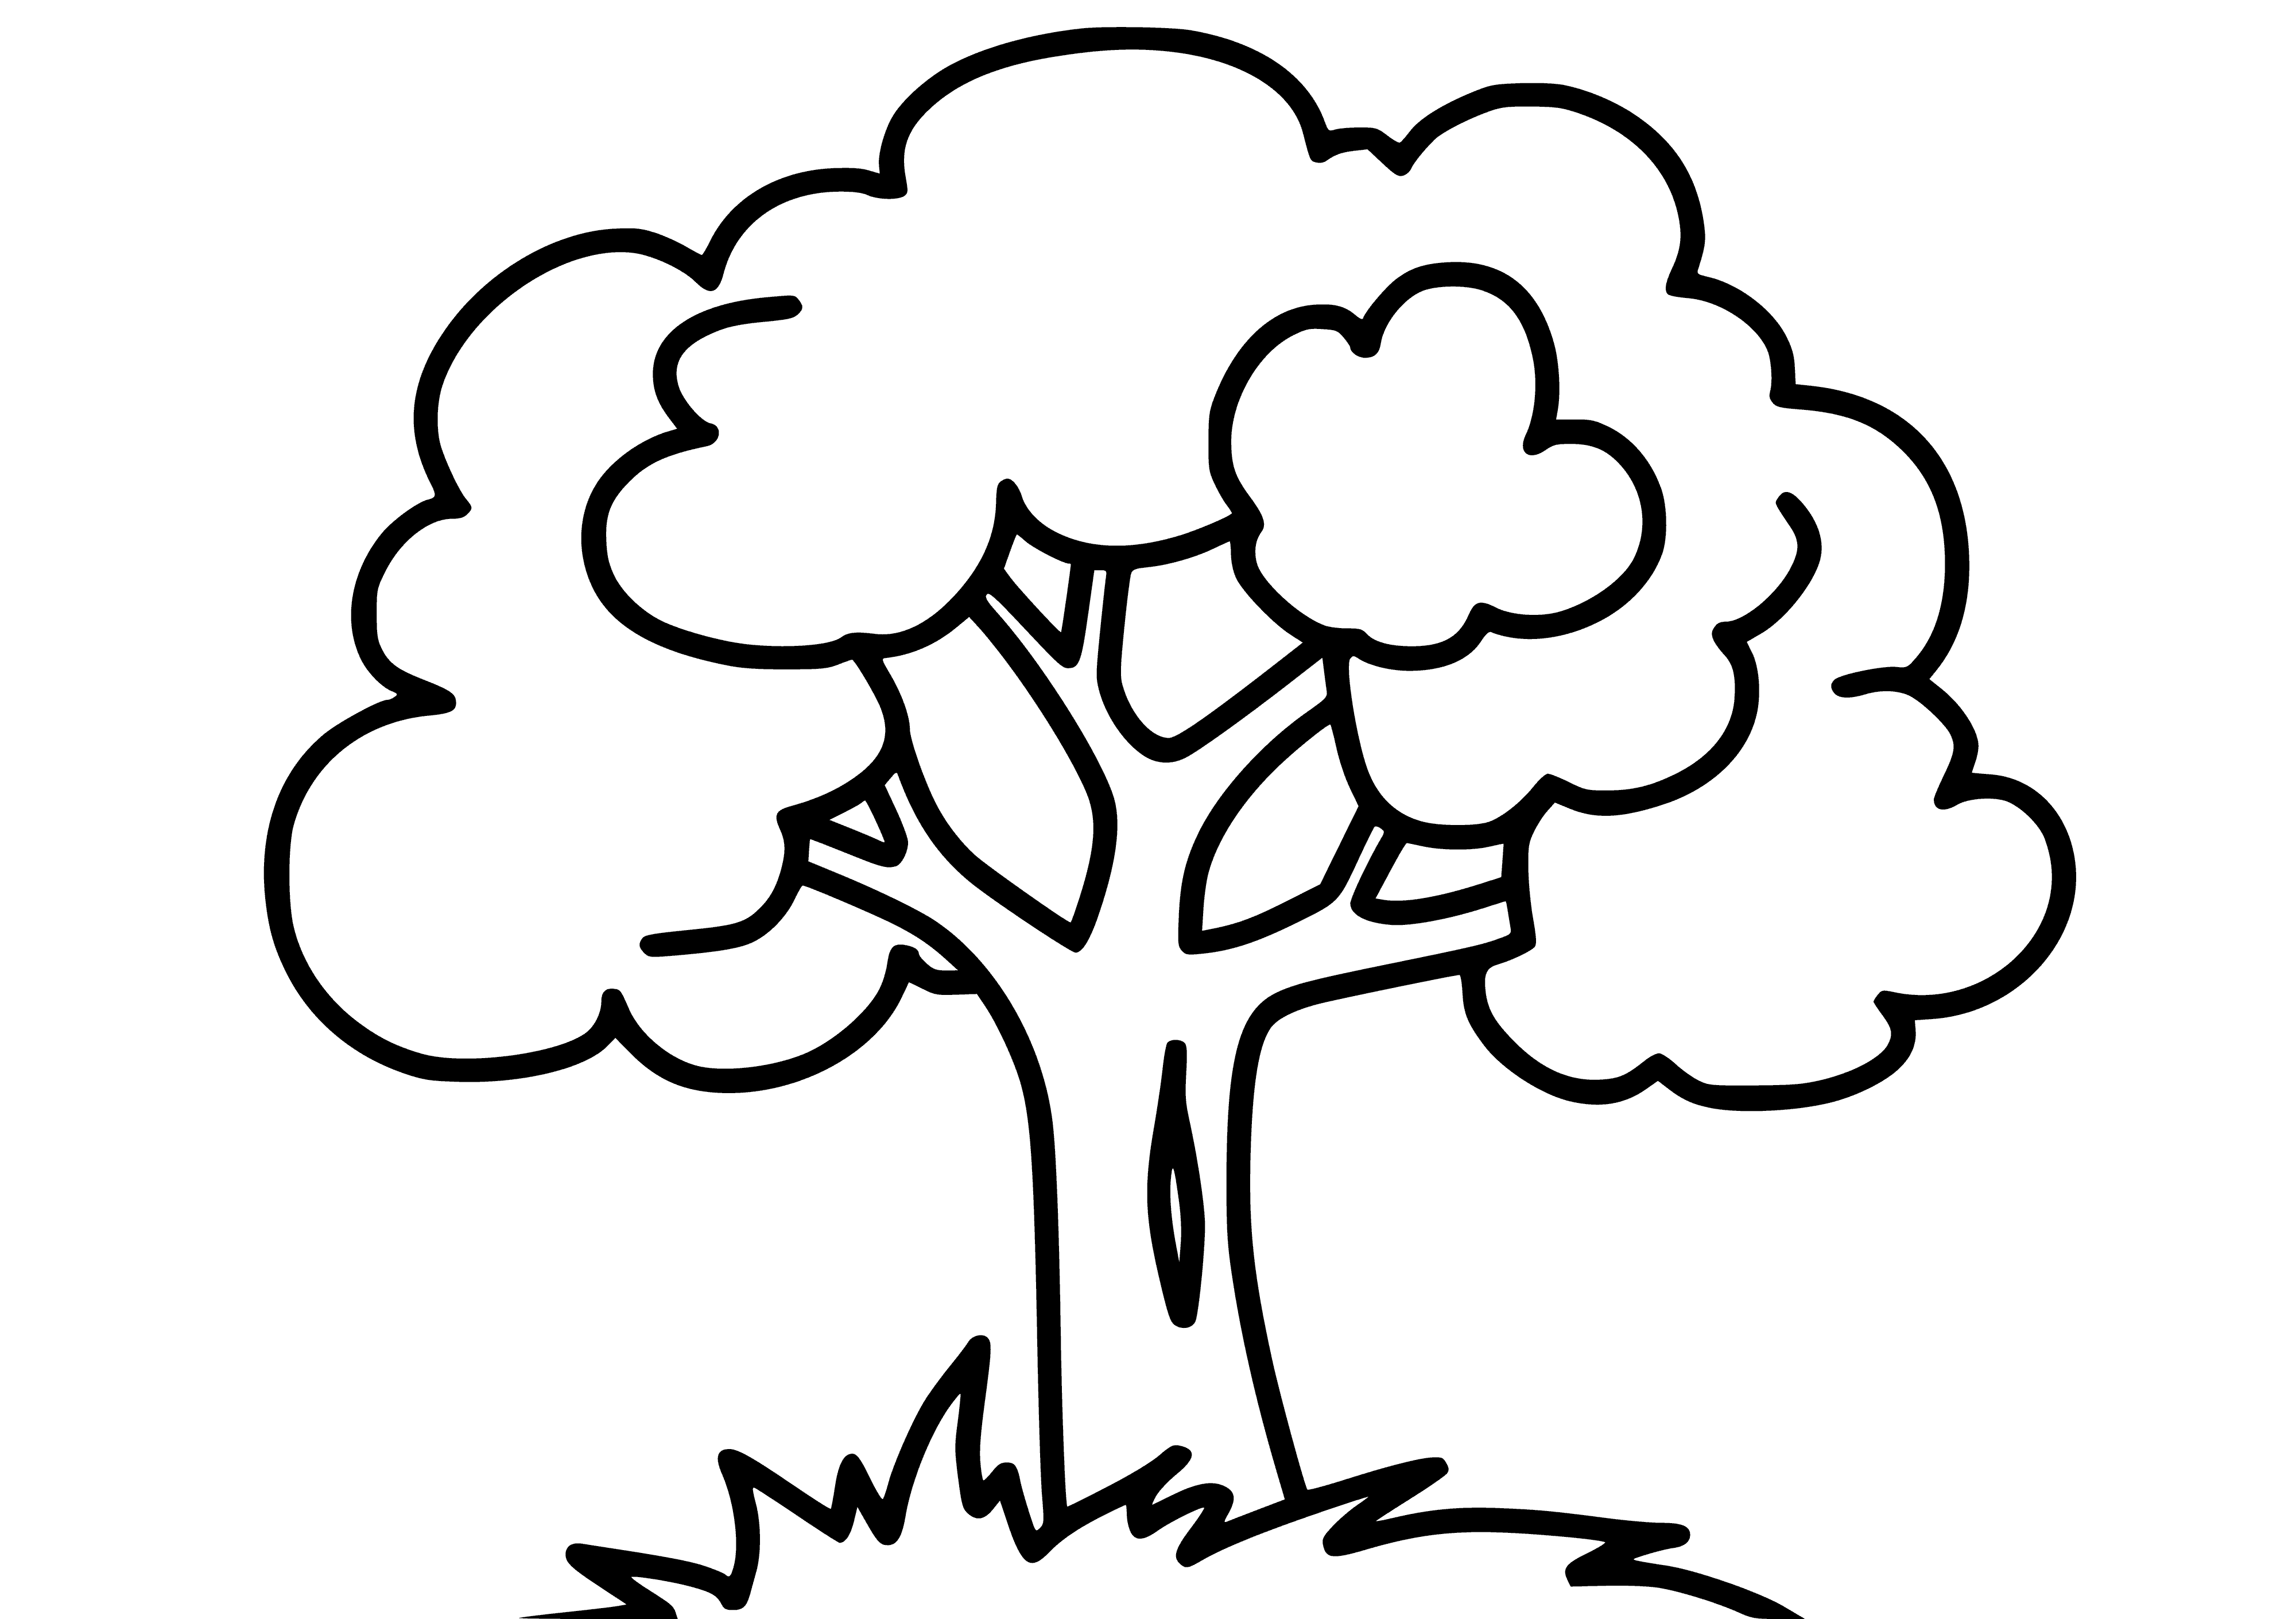 coloring page: Three coloring pages of woods, with a tree, path, and hut. #ColoringPages